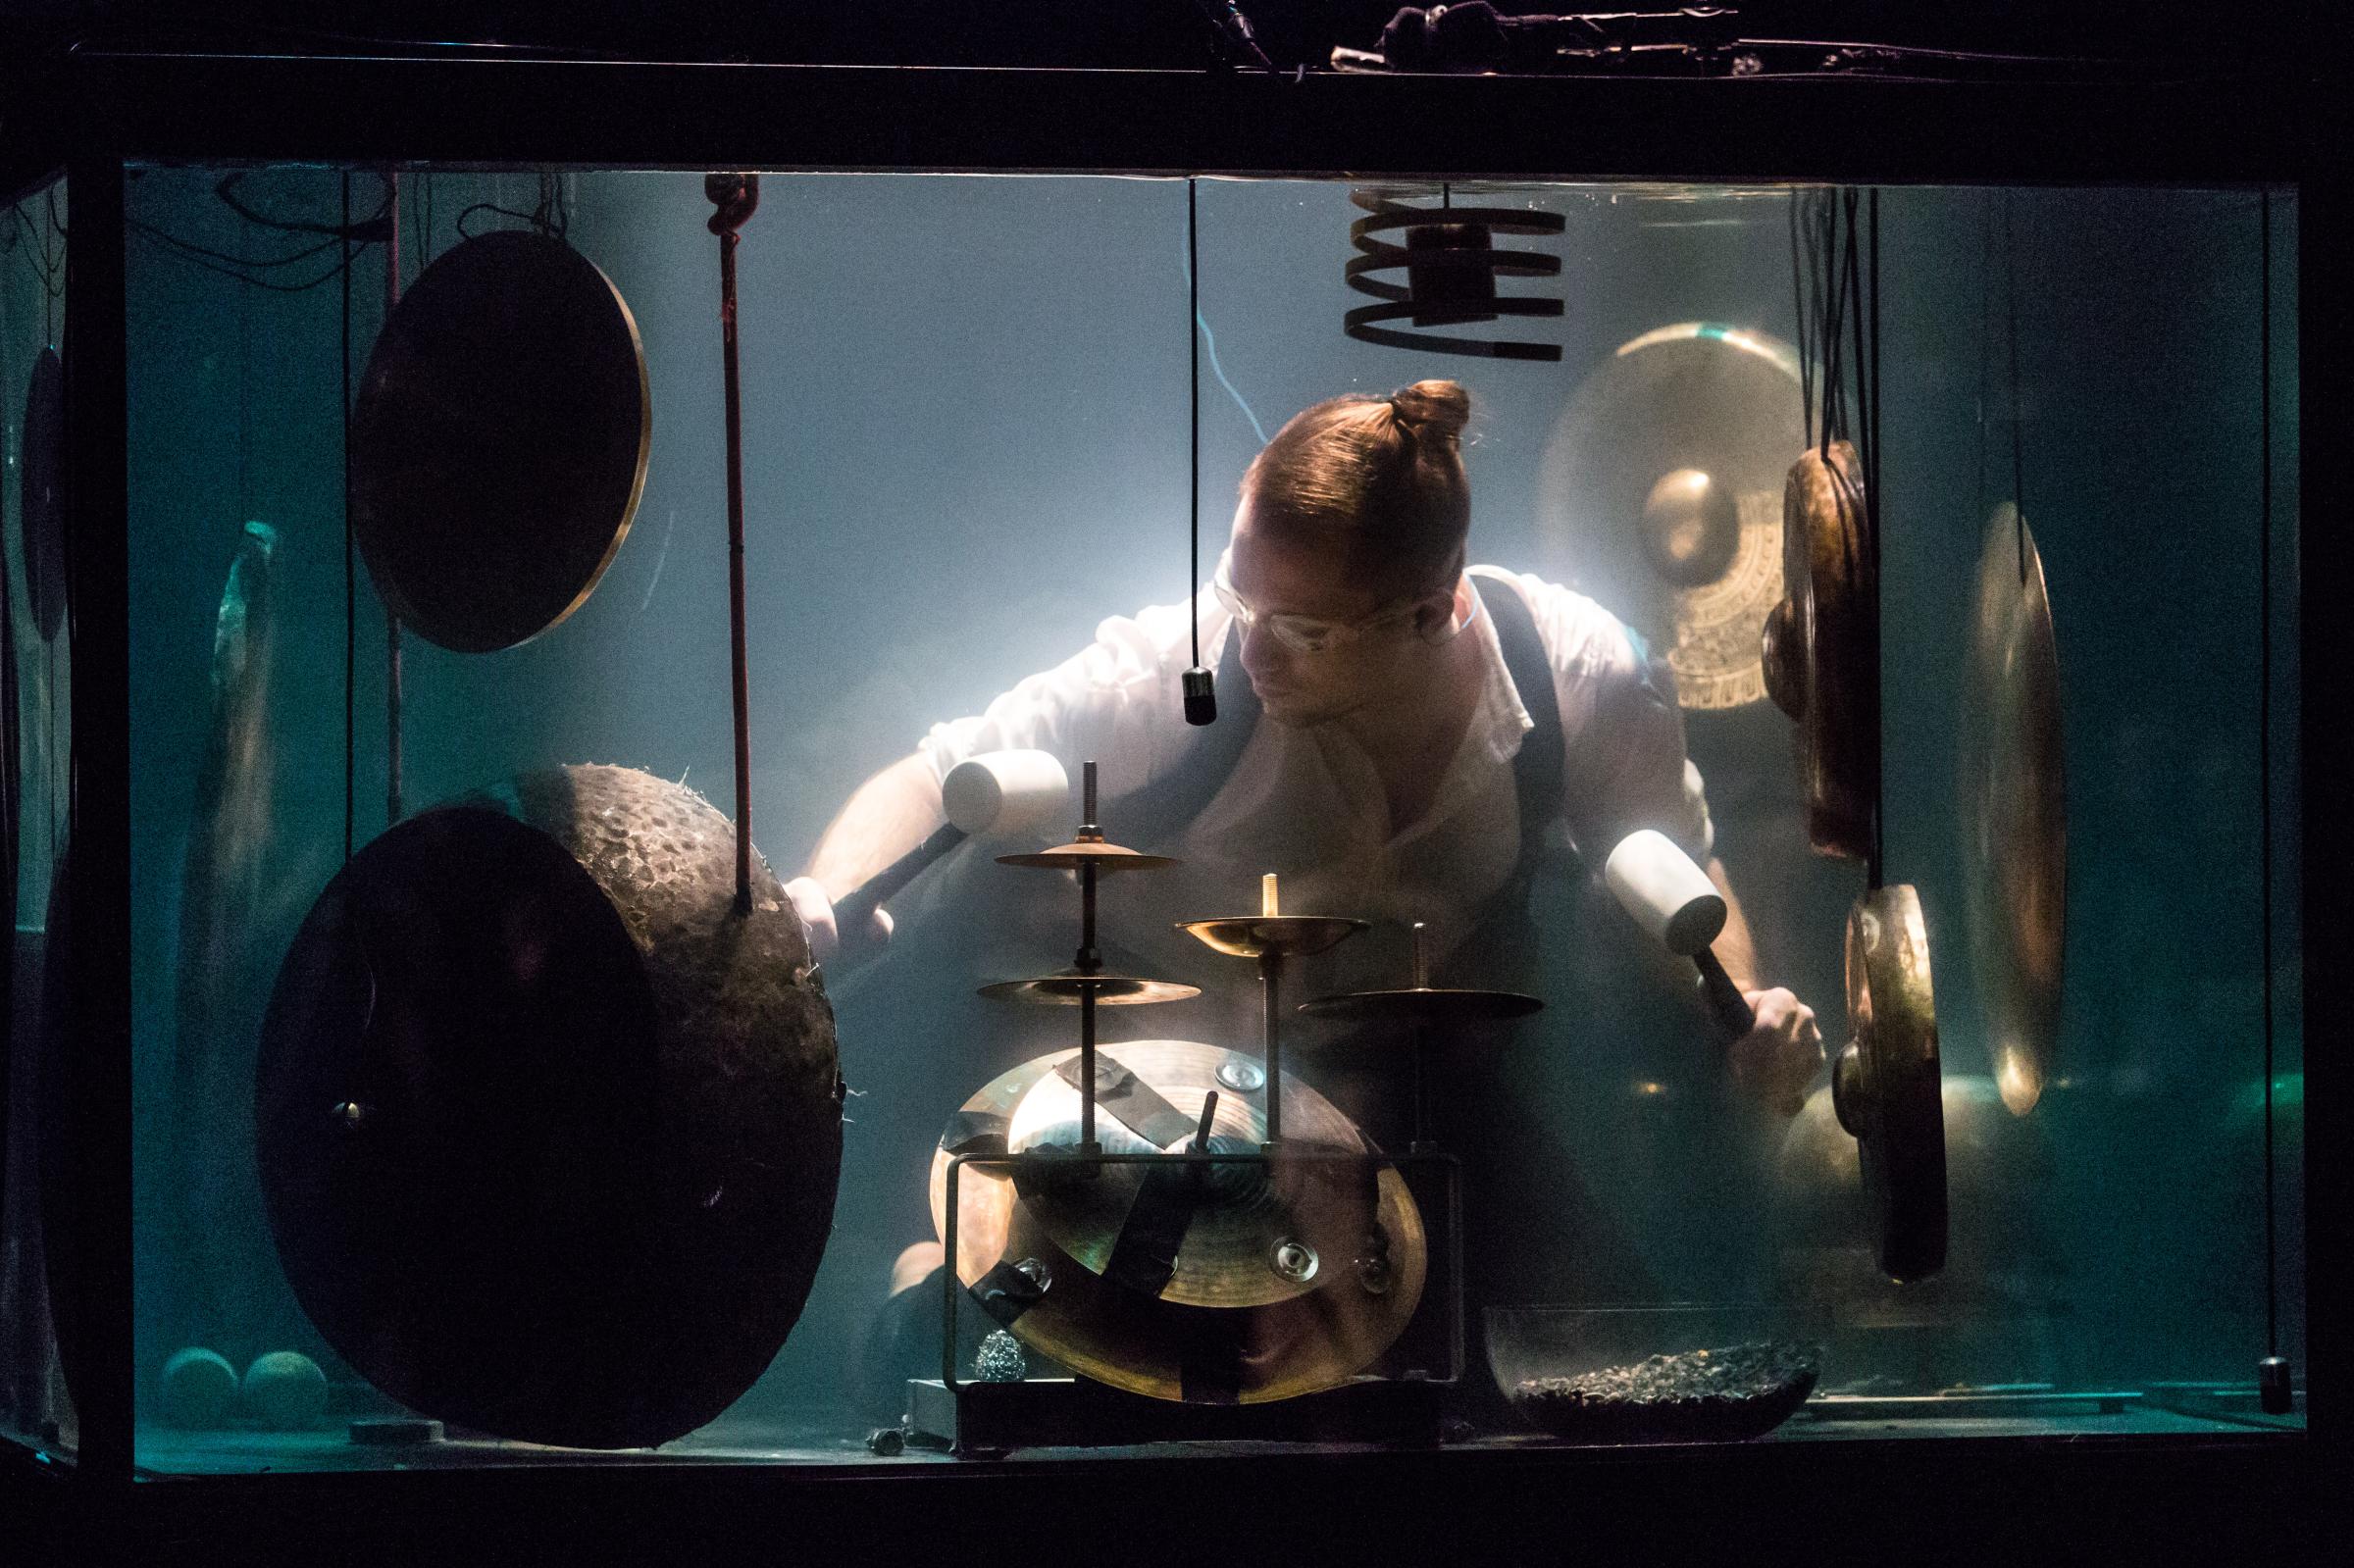 Drummer Morten Poulsen perform underwater ahead of their concert at Hong Kong's New Vision Arts Festival. / Photo by Aria Hangyu Chen for TIME.